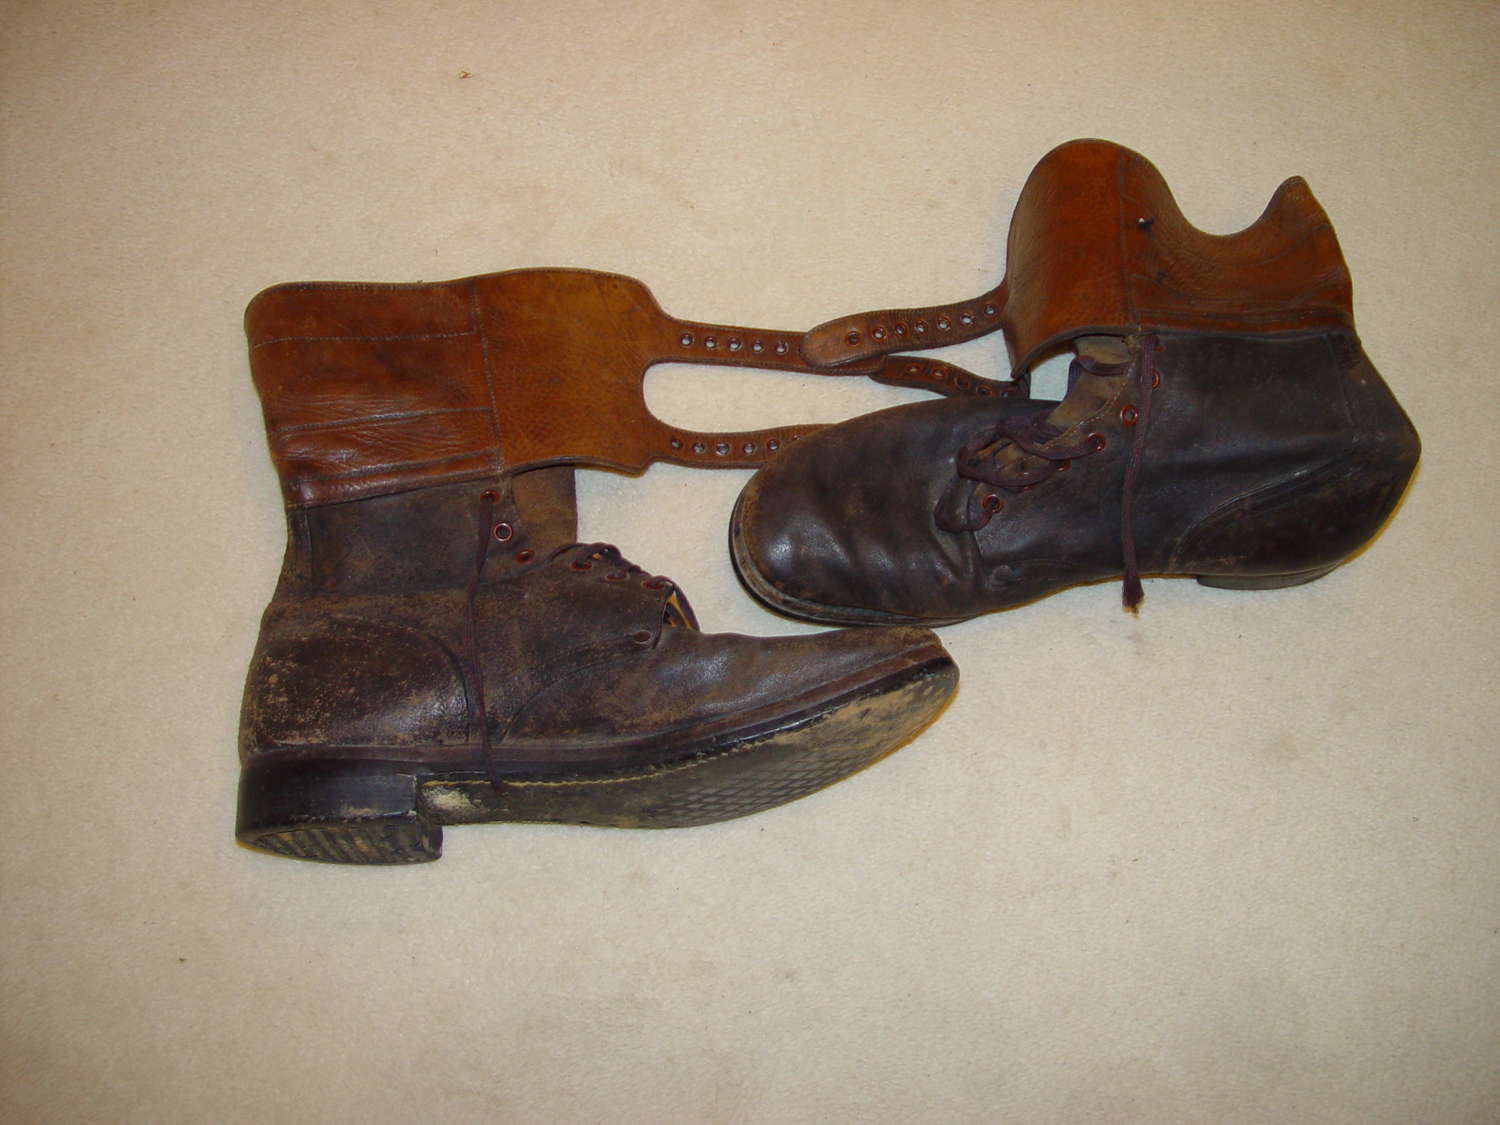 US army late war buckle boots